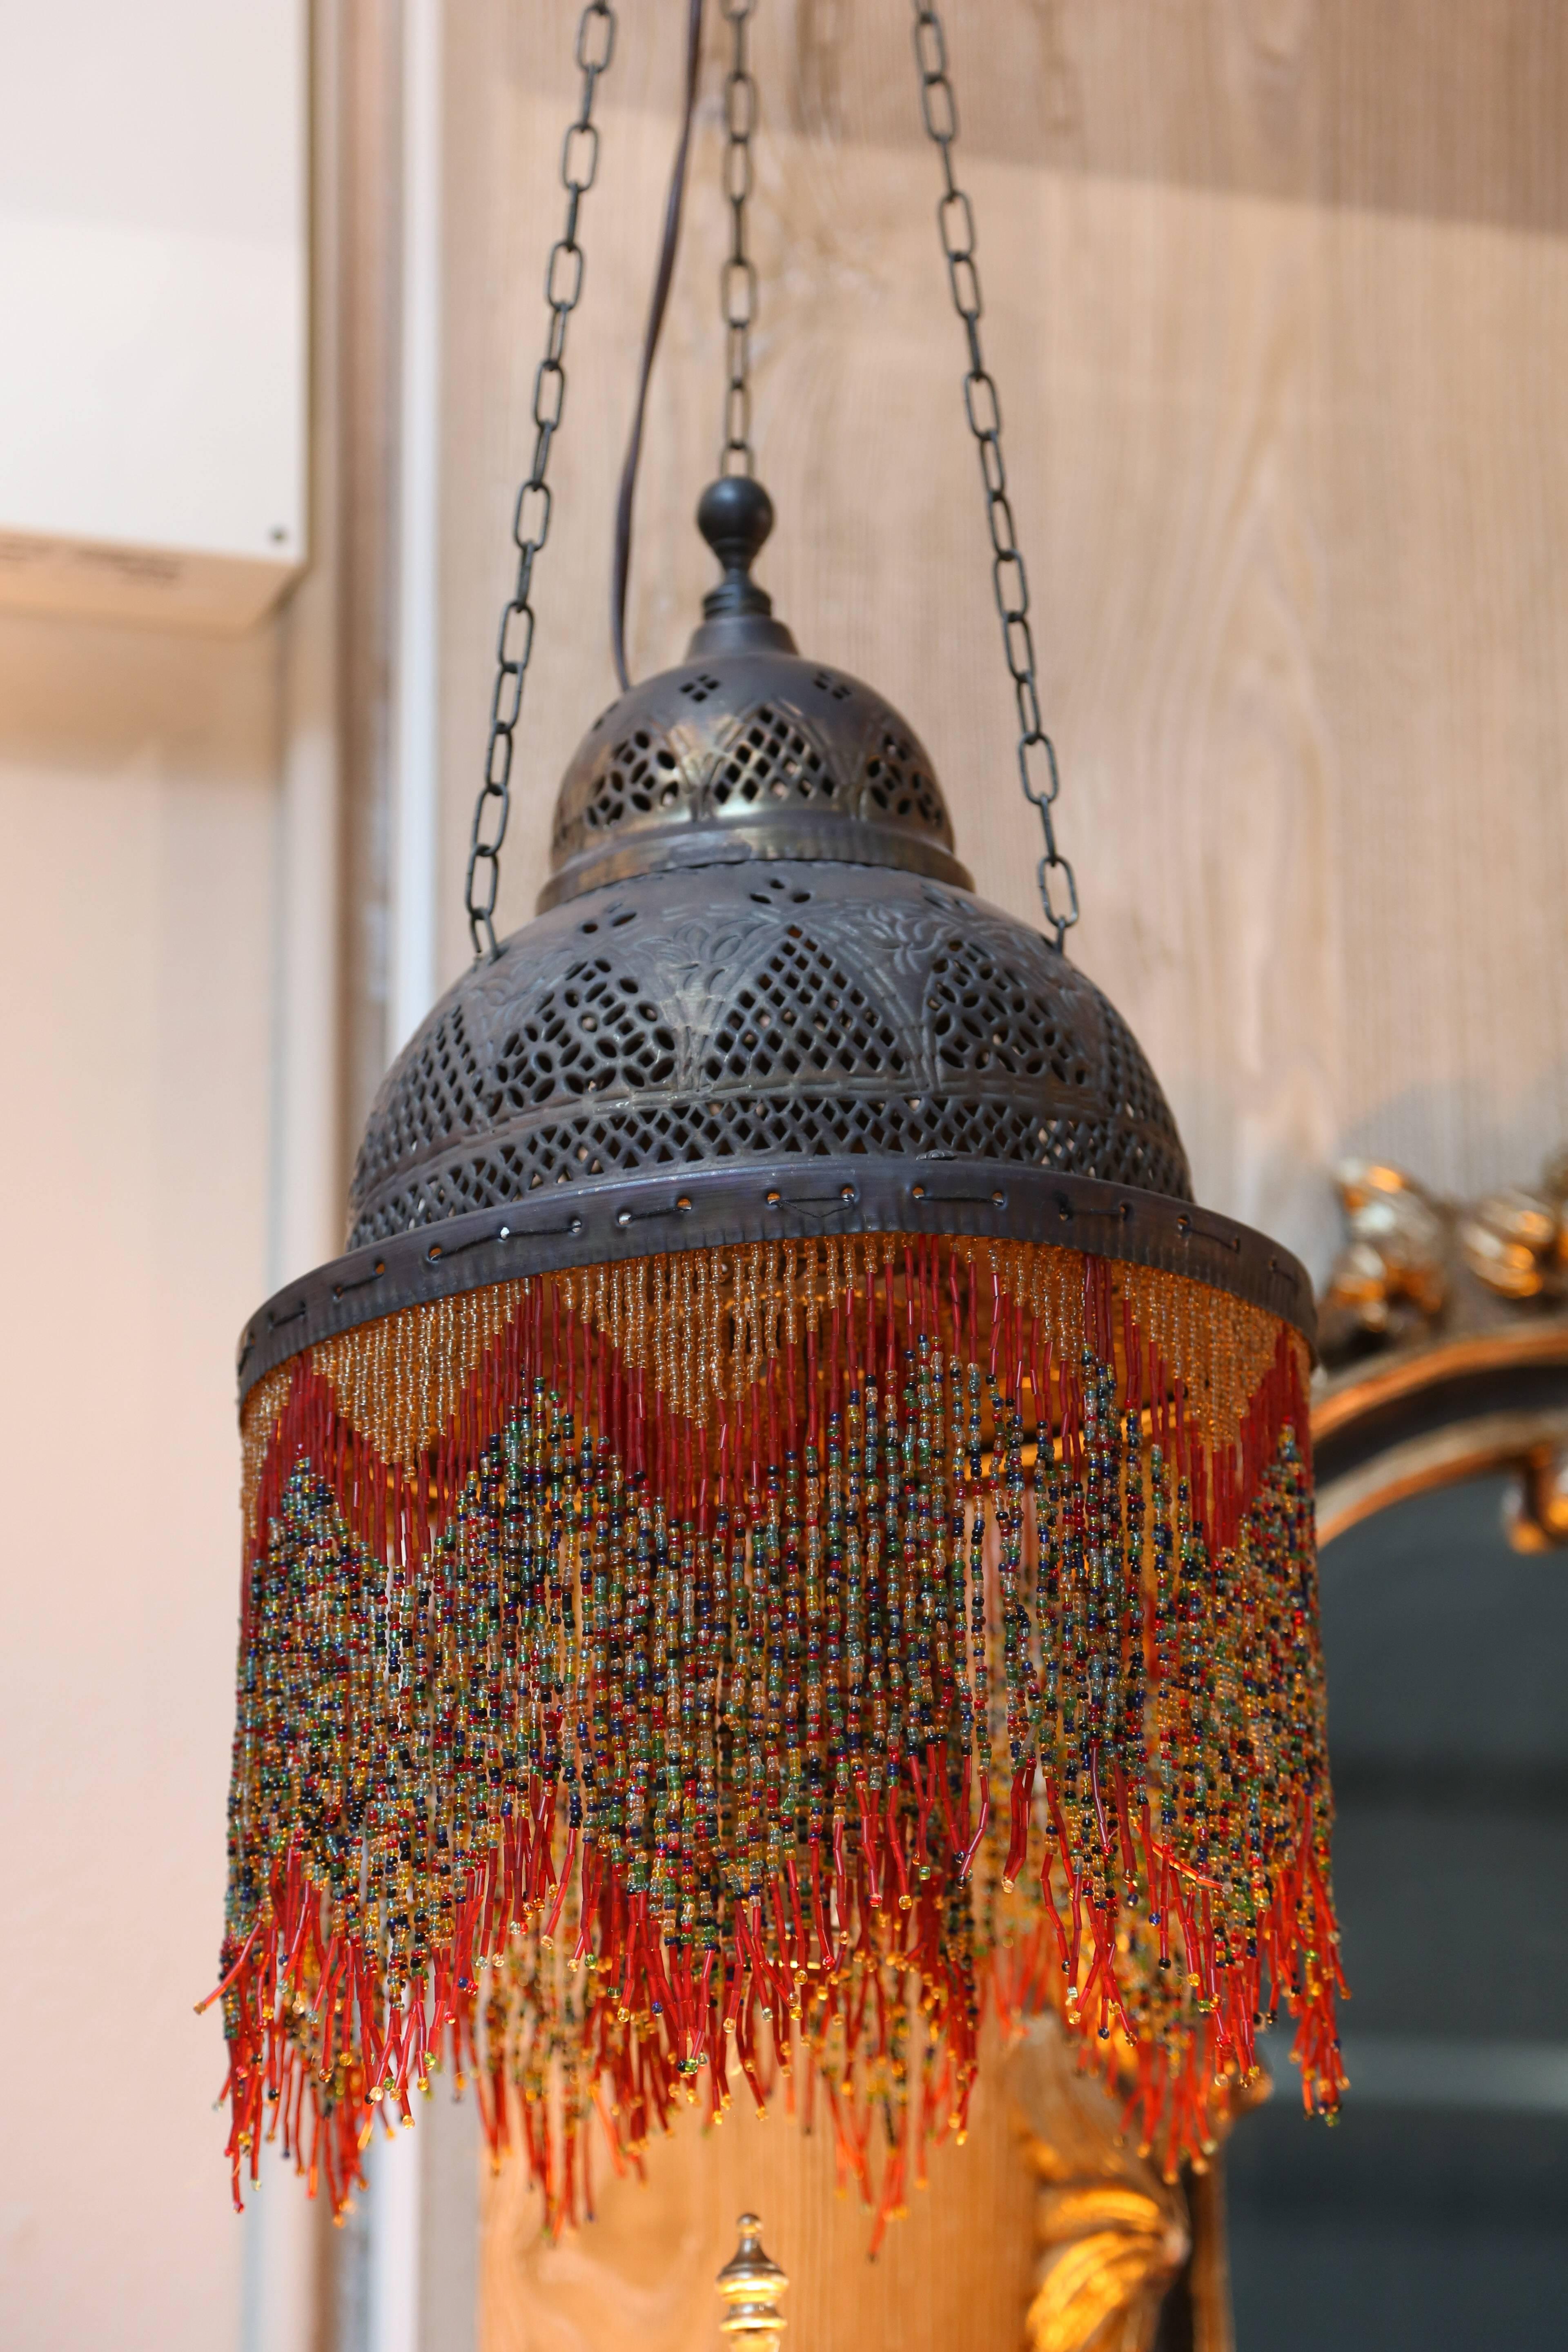 Suspended by three chains, the Classic dome top is elaborately pierced and adorned with beaded fringes both on the rim and surrounding the bulb.